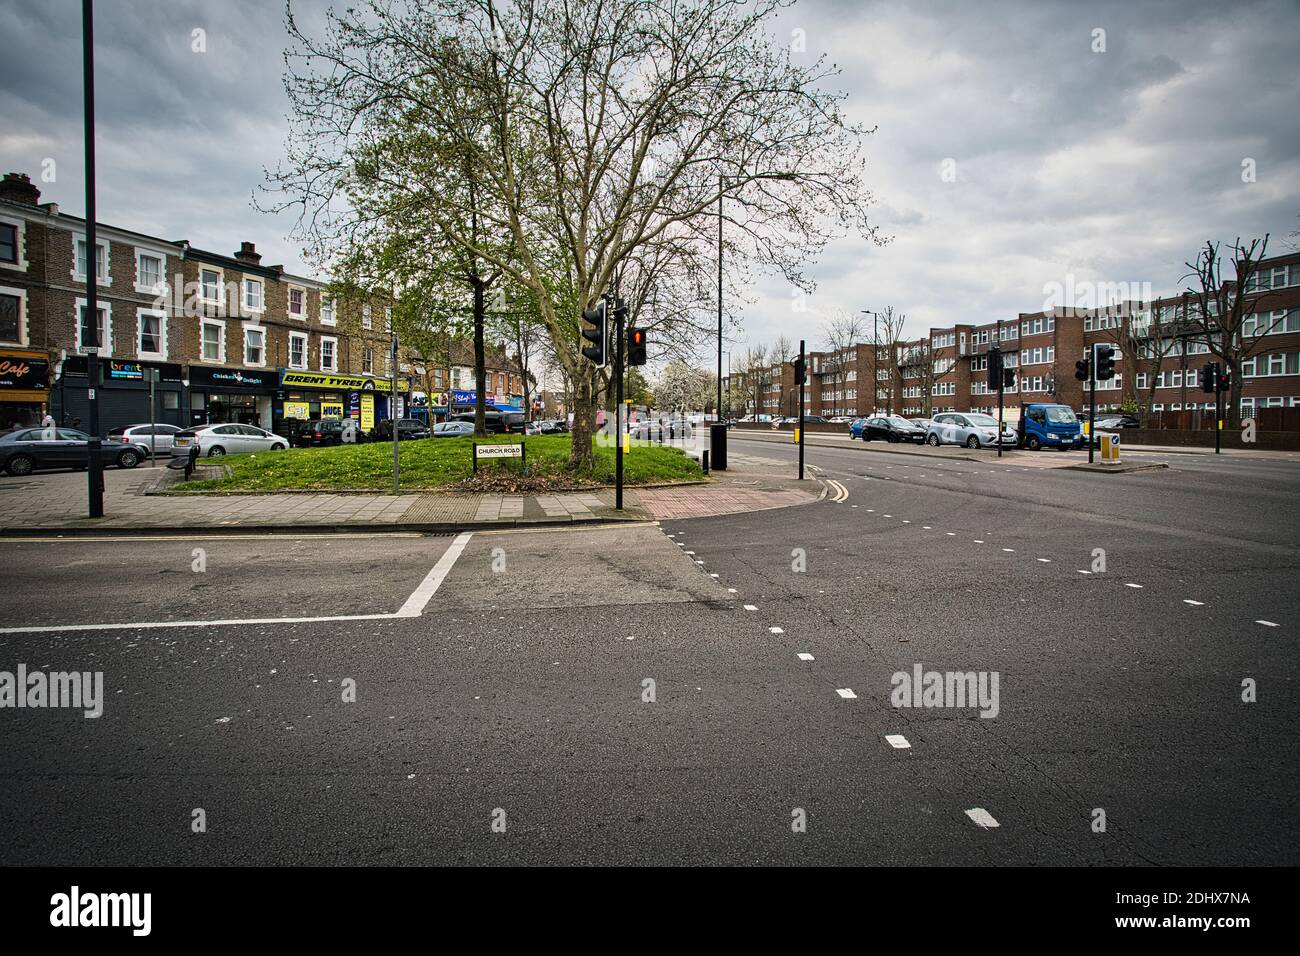 Great Britain / England /London /The estates in Church Road is the most deprived area in London . Stock Photo